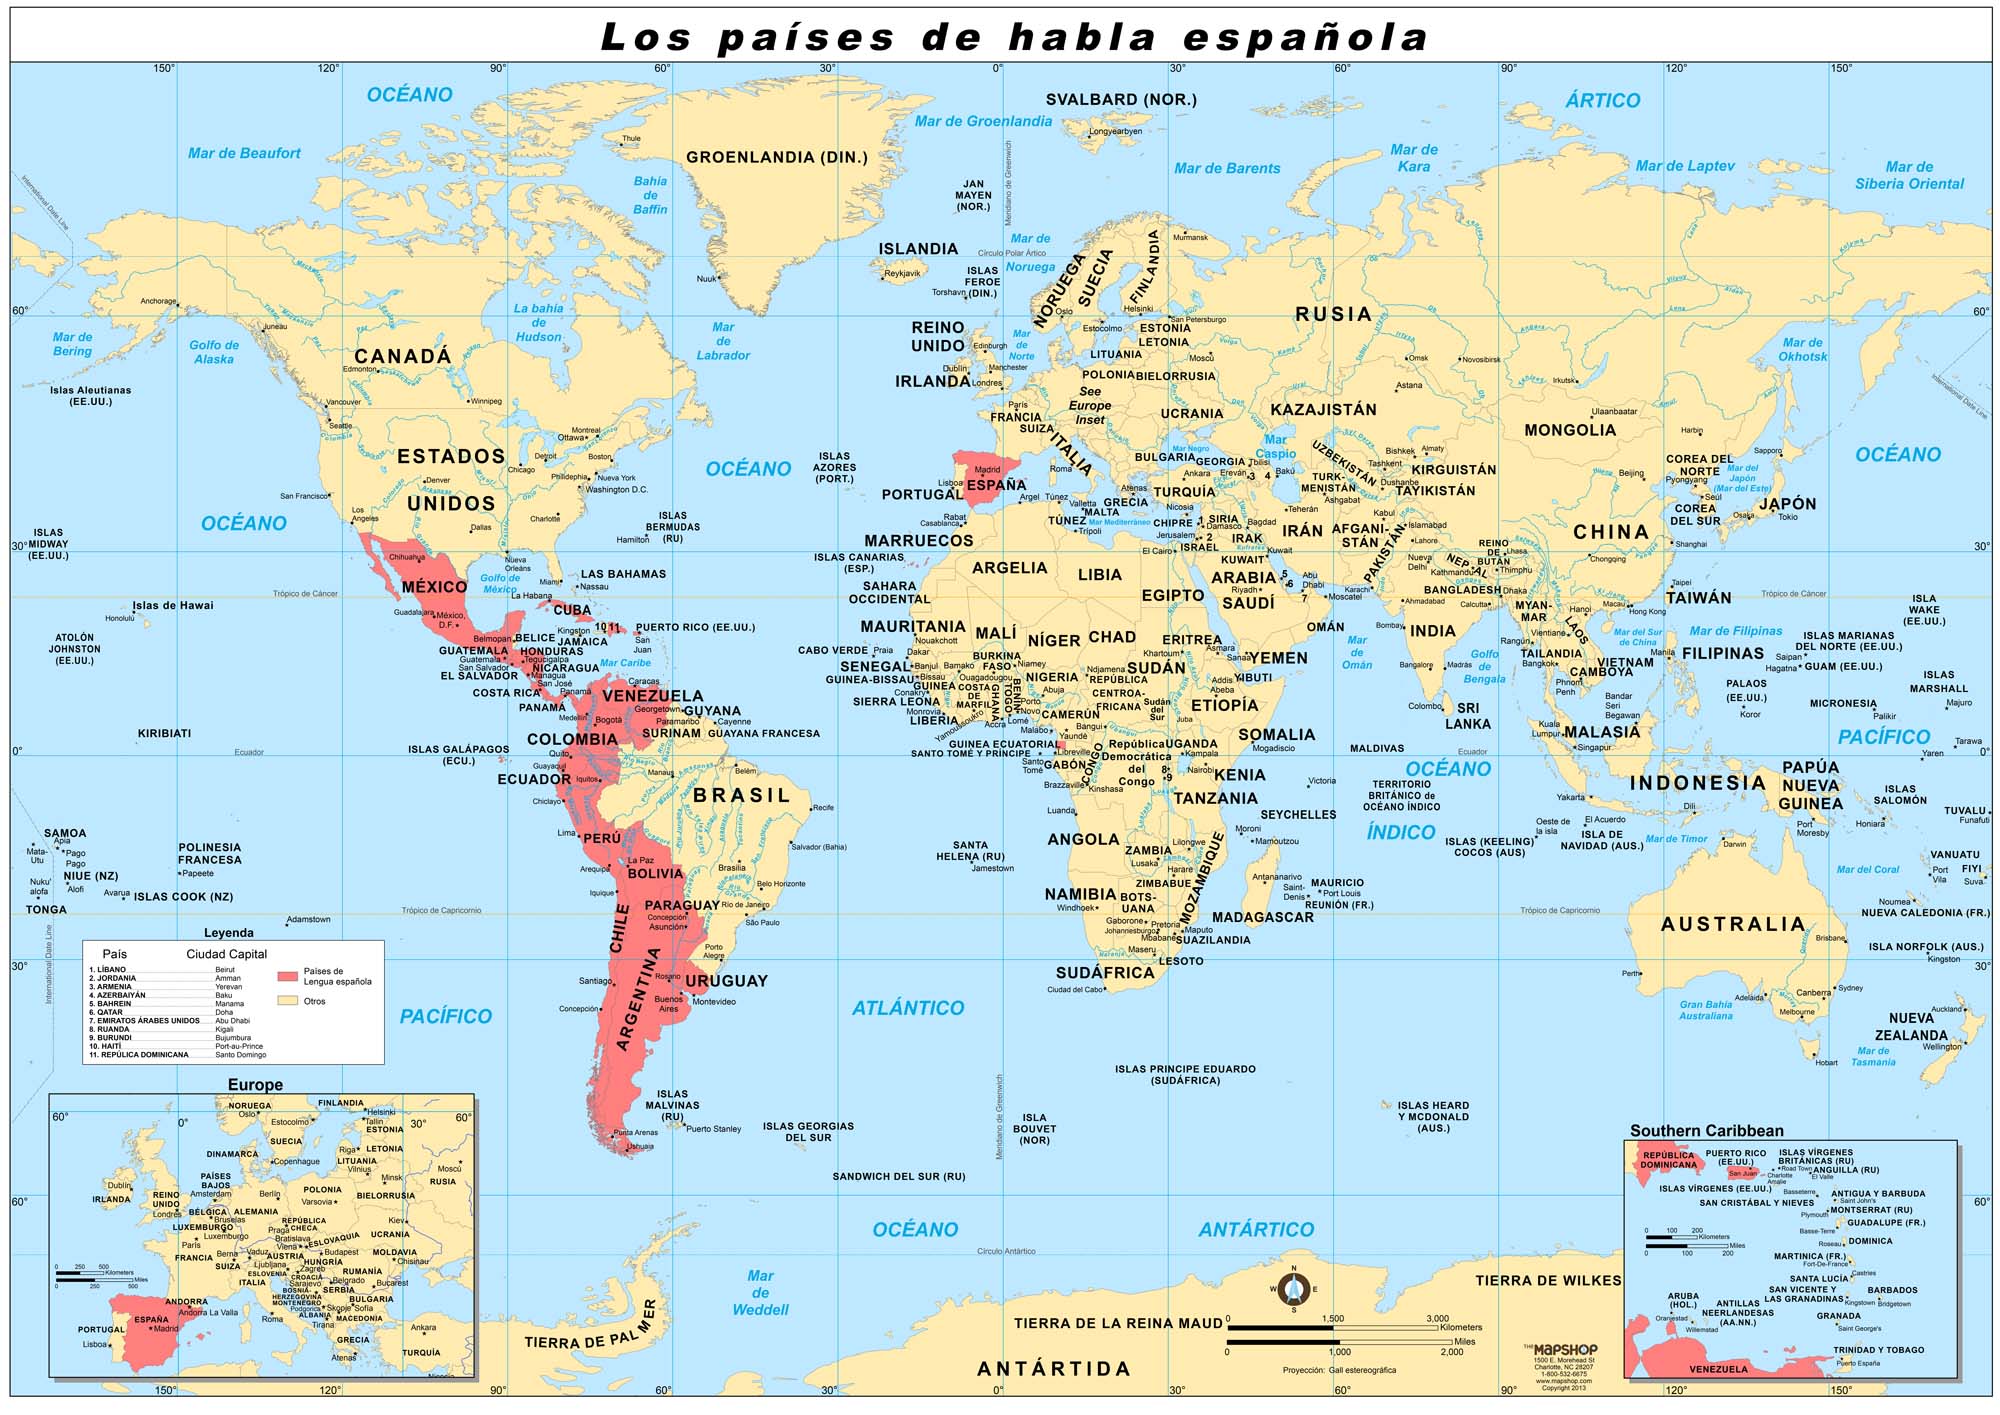 world-map-of-spanish-speaking-countries-mammoth-mountain-trail-map